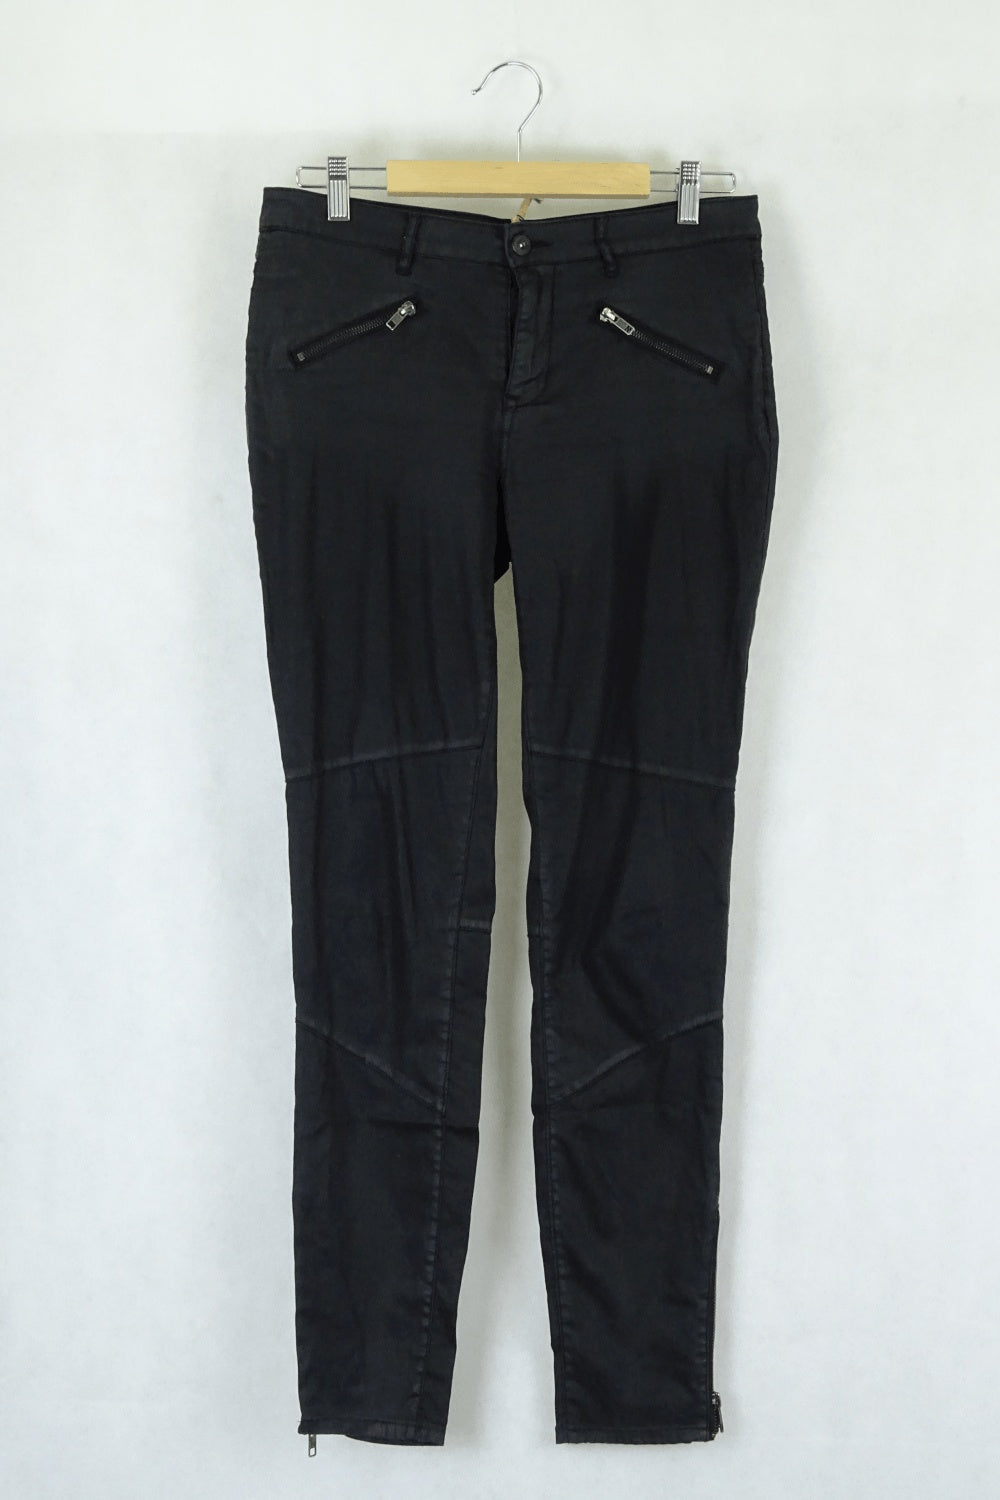 Country Road Black Wet Leather Jeans 10